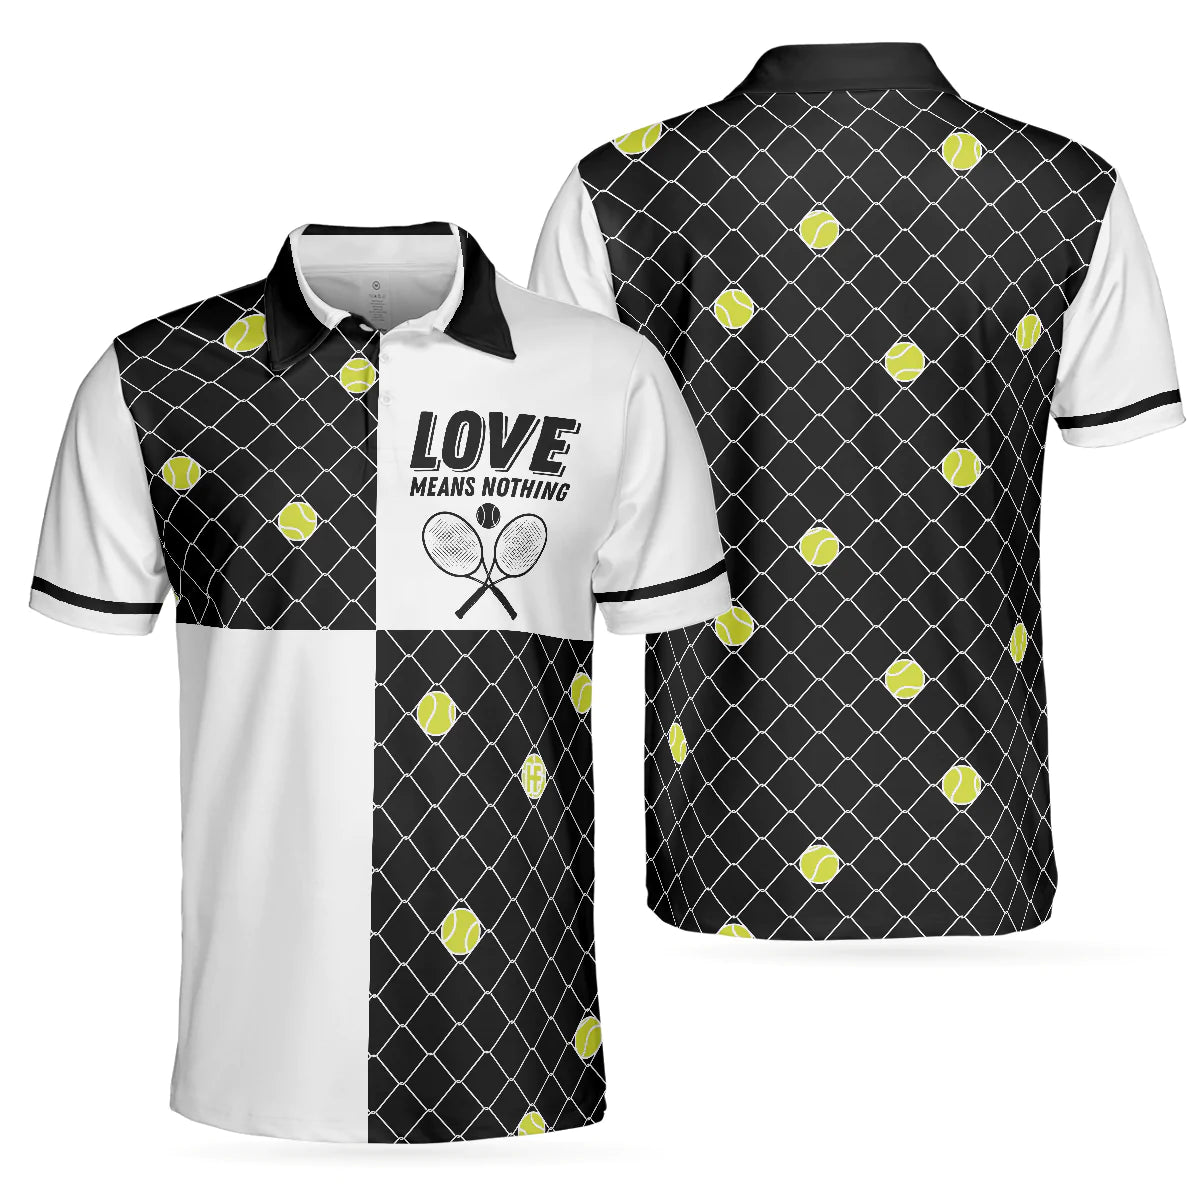 Men Tennis Polo Shirt - Love Means Nothing Tennis Polo Shirt - Tennis Ball Stuck In Steal Wire Fence Polo Shirt For Men, Tennis Players - Amzanimalsgift